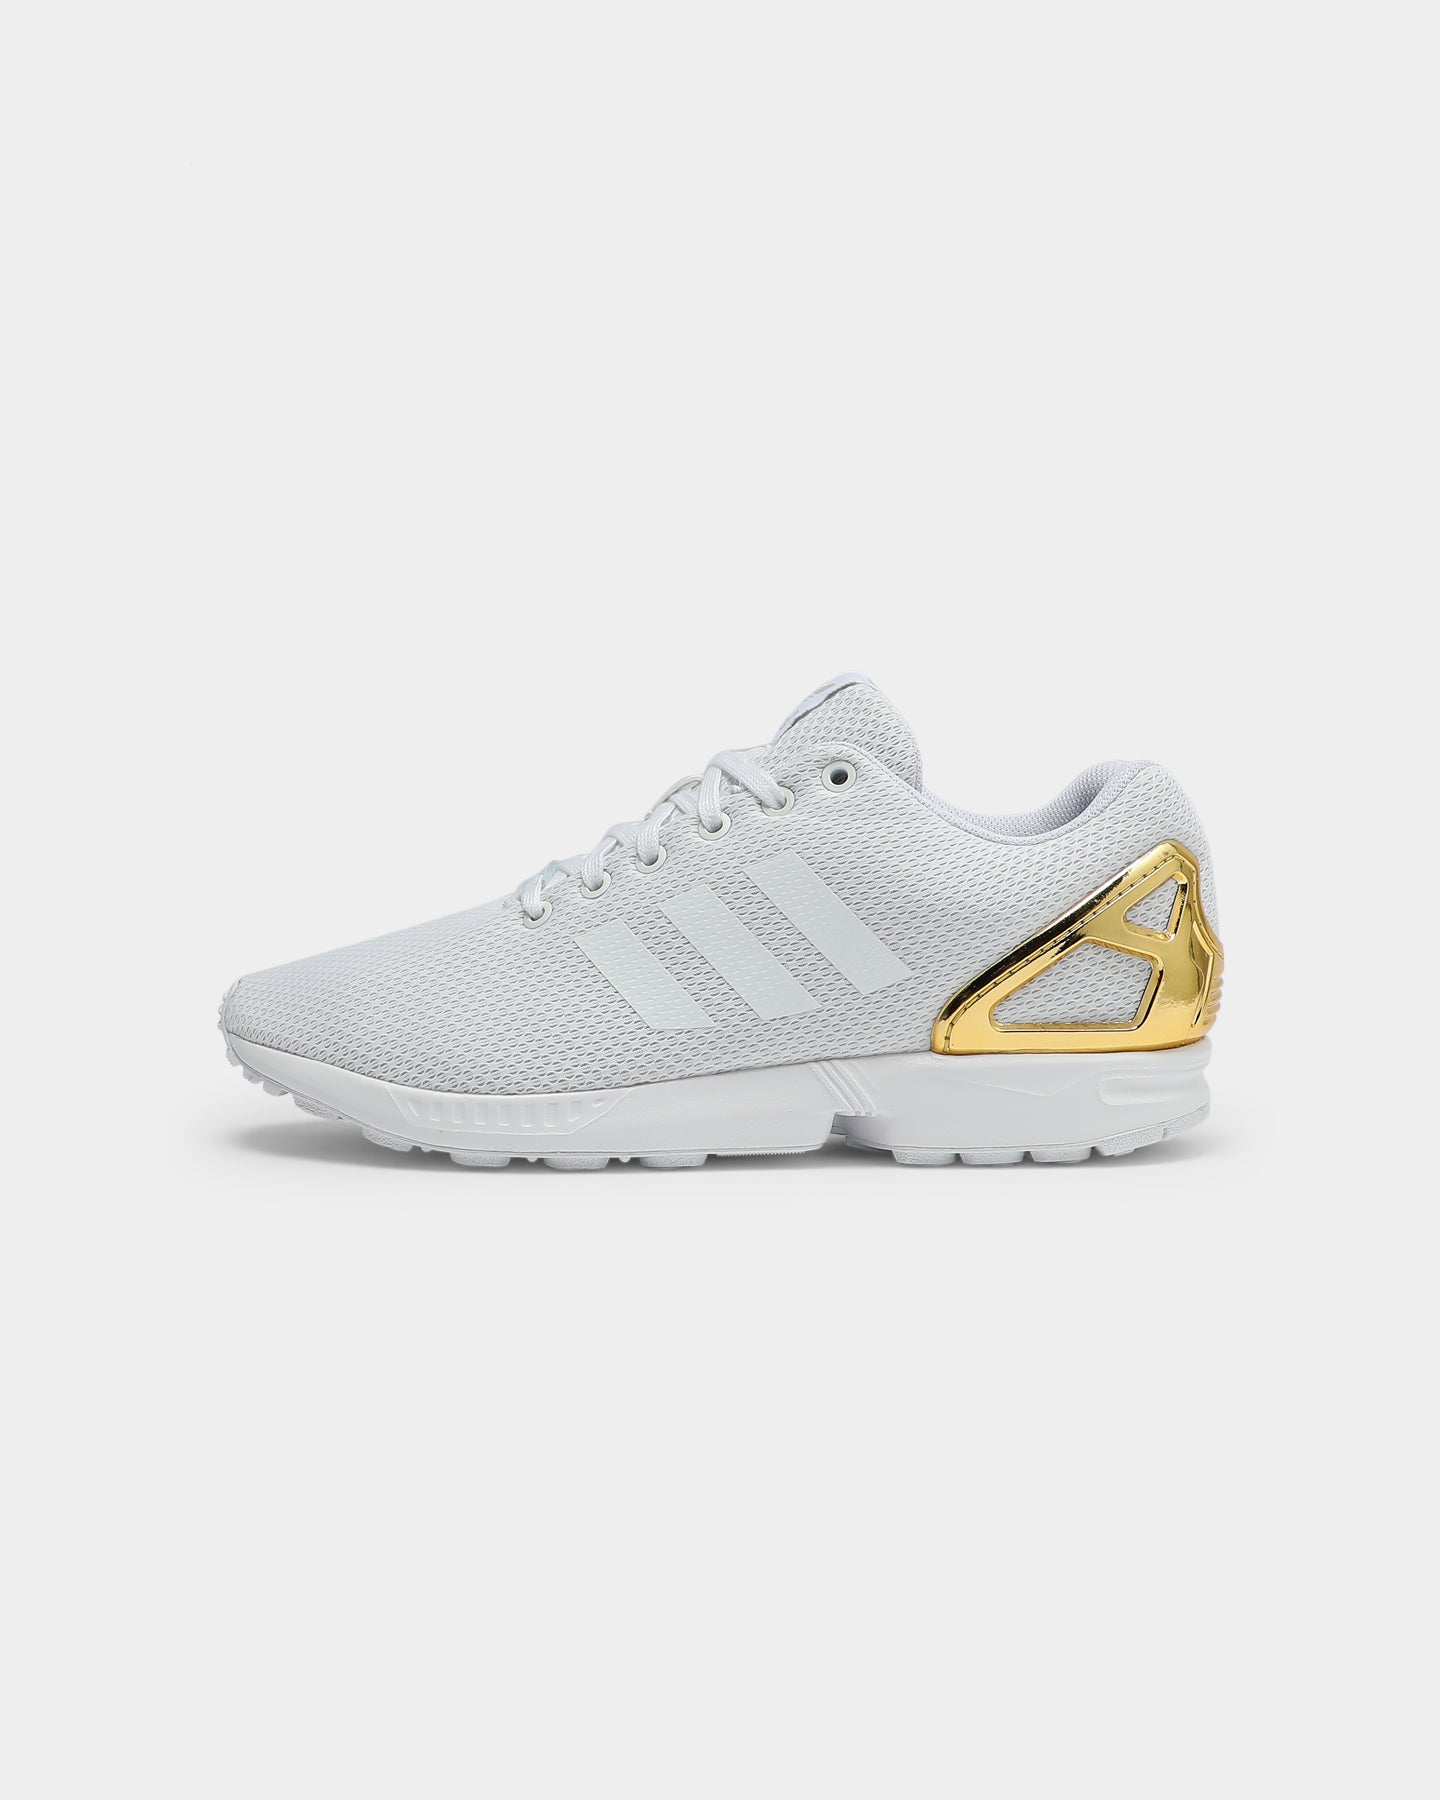 Adidas ZX Flux White/Gold | Culture Kings